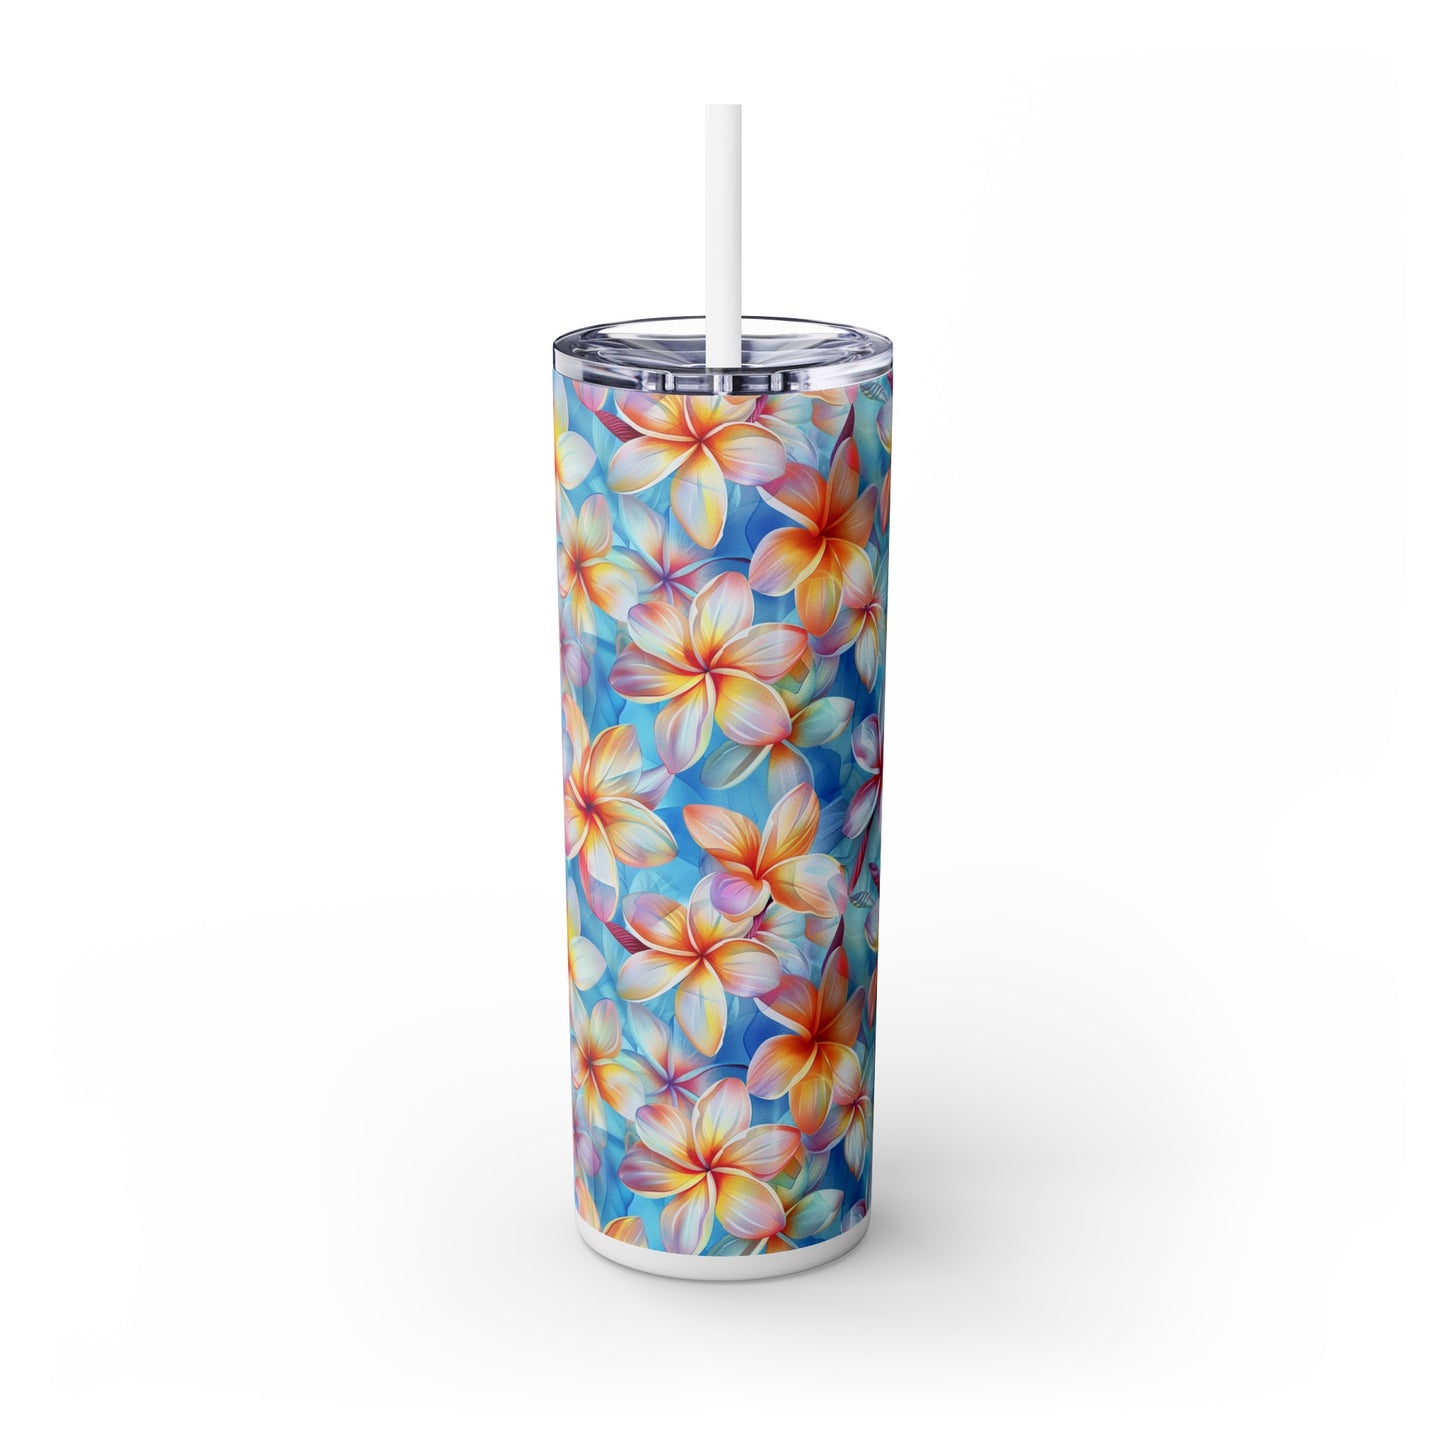 Stainless Steel Tumbler with Lid & Straw, 20 oz (Plumeria Liberty Print) Double-walled, Keeps Drinks Hot or Cold